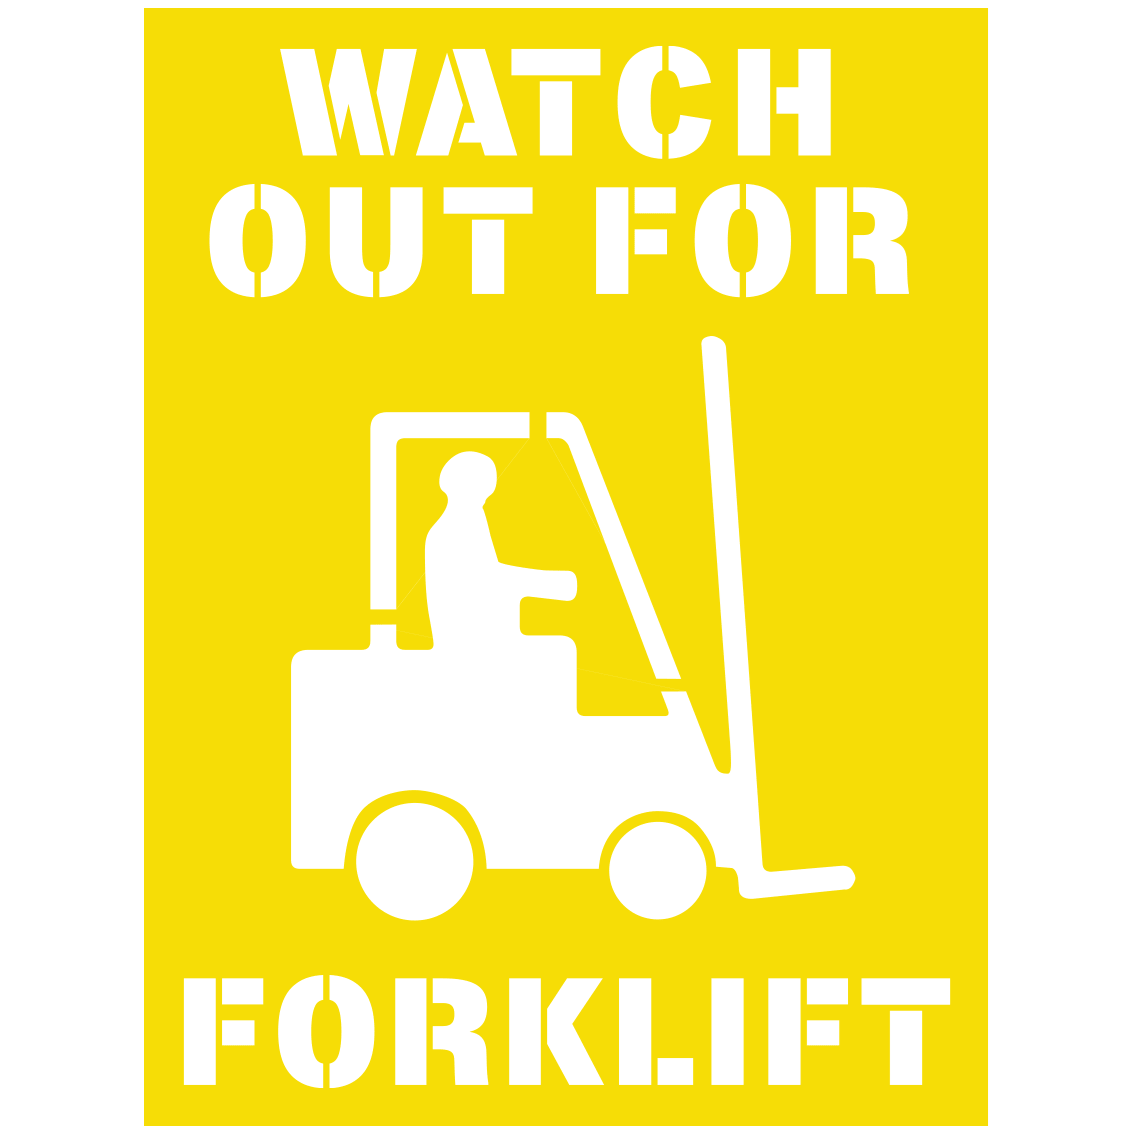 600x 450mm – Poly Stencil – Watch Out For Forklift